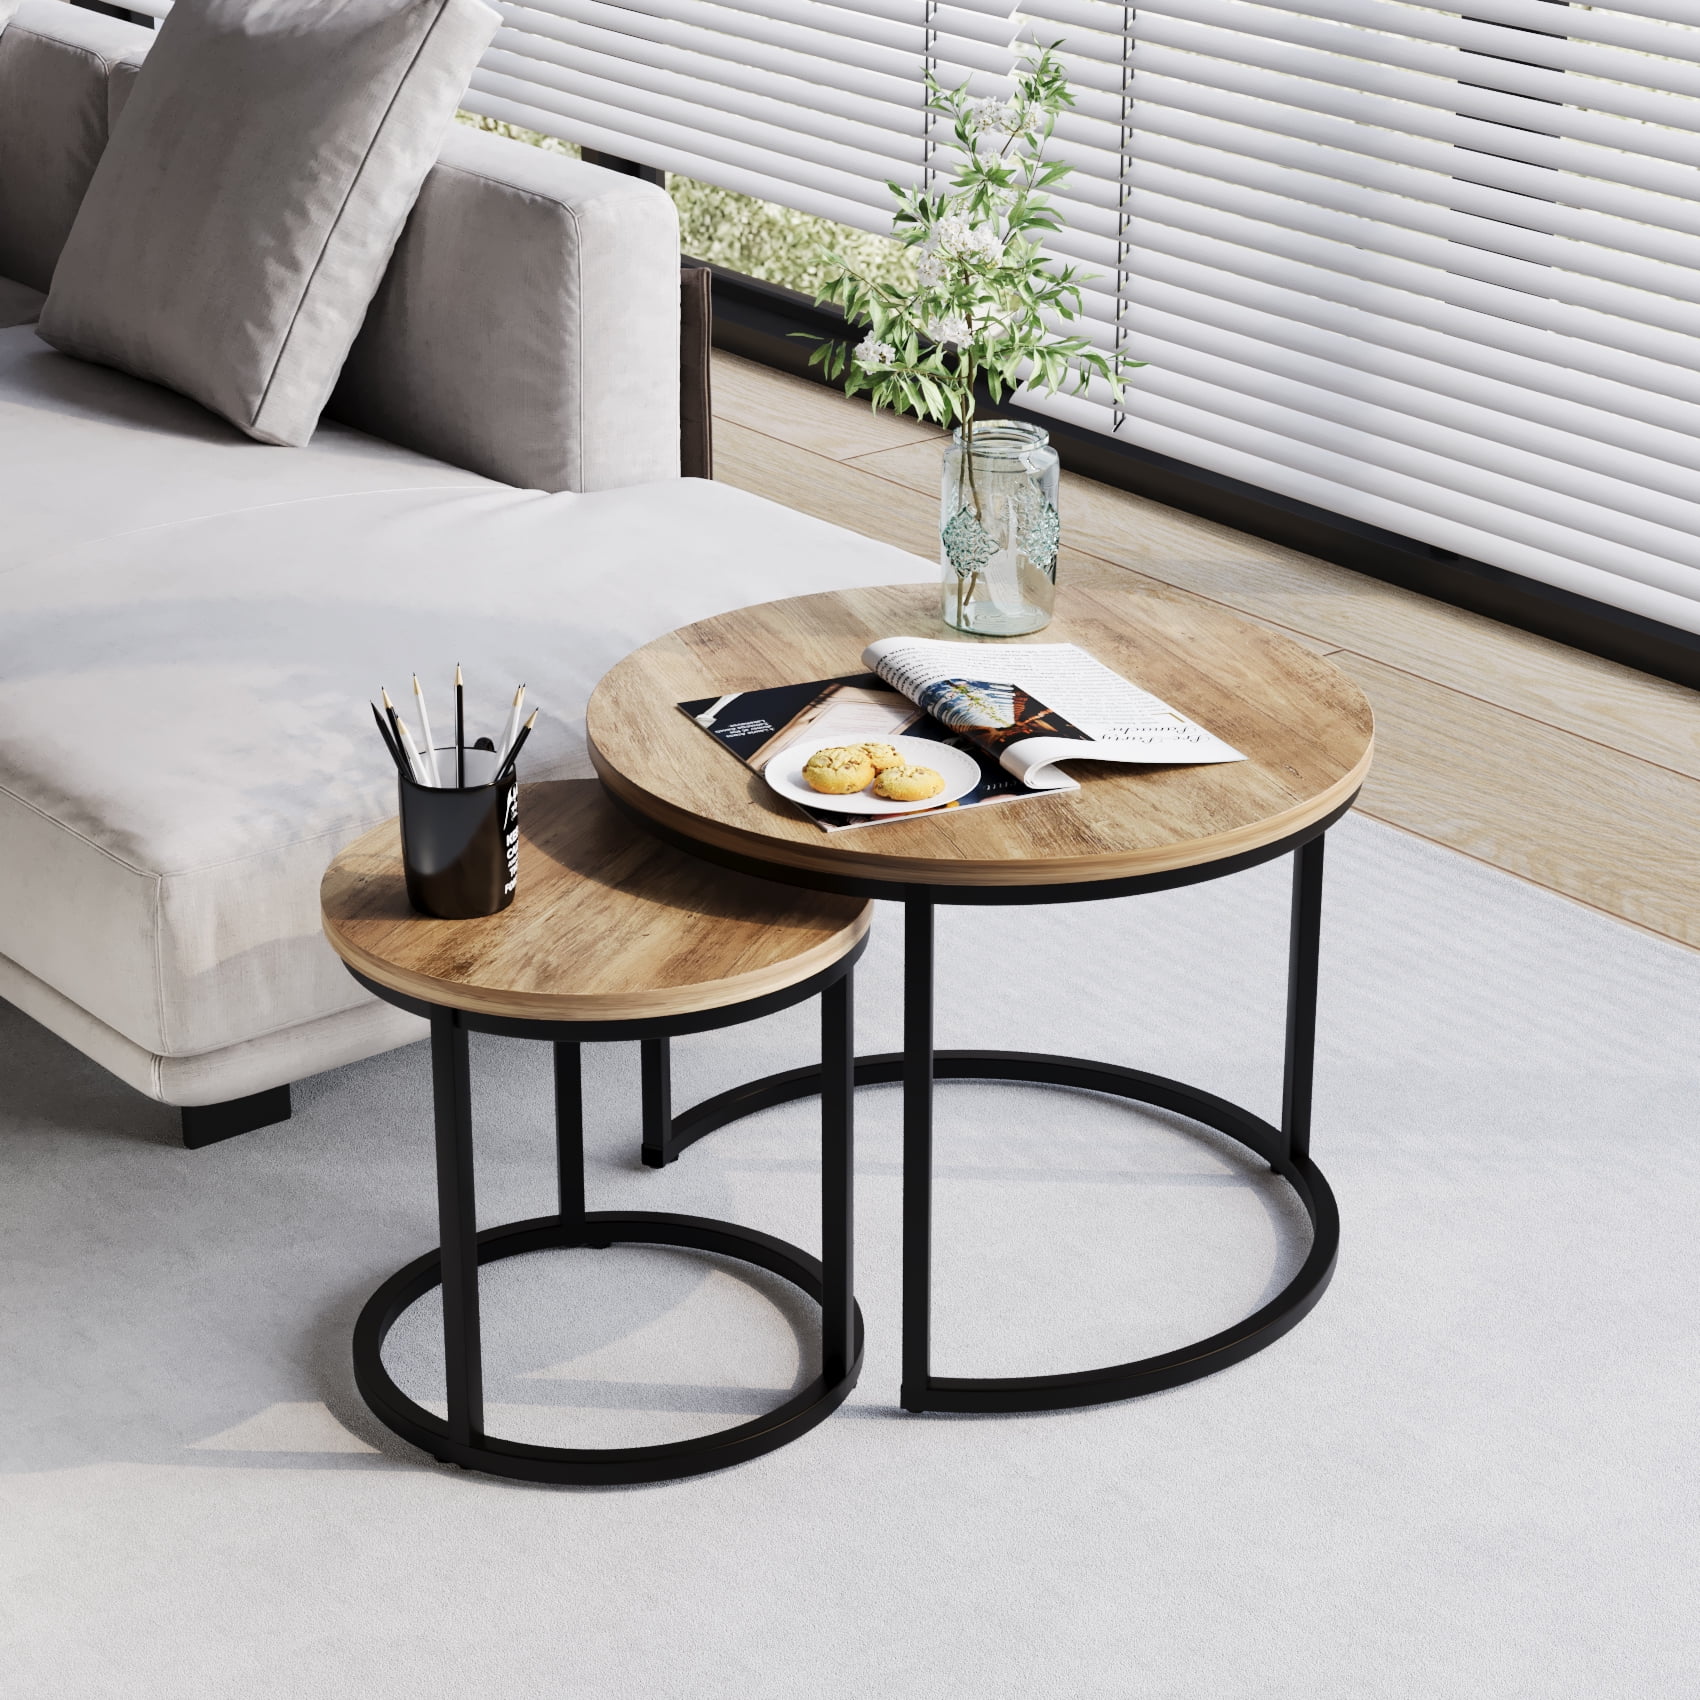 Semiocthome Modern Nesting Coffee Table Set of 2,Wood Top End Table ...